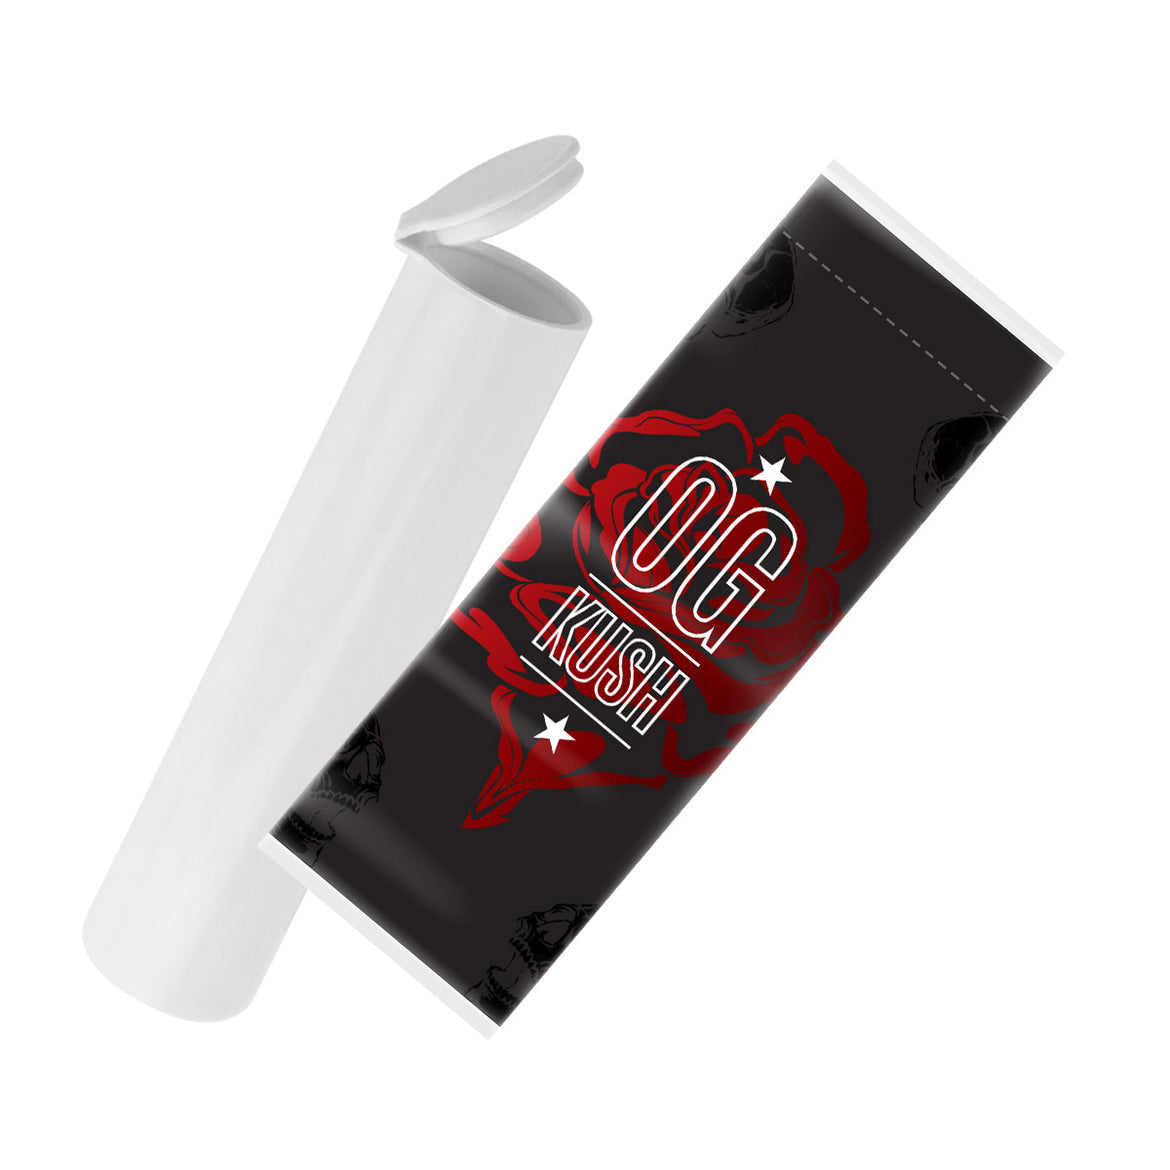 OG Kush Strain Sleeve Labels and Pre Roll Tubes | Free Shipping